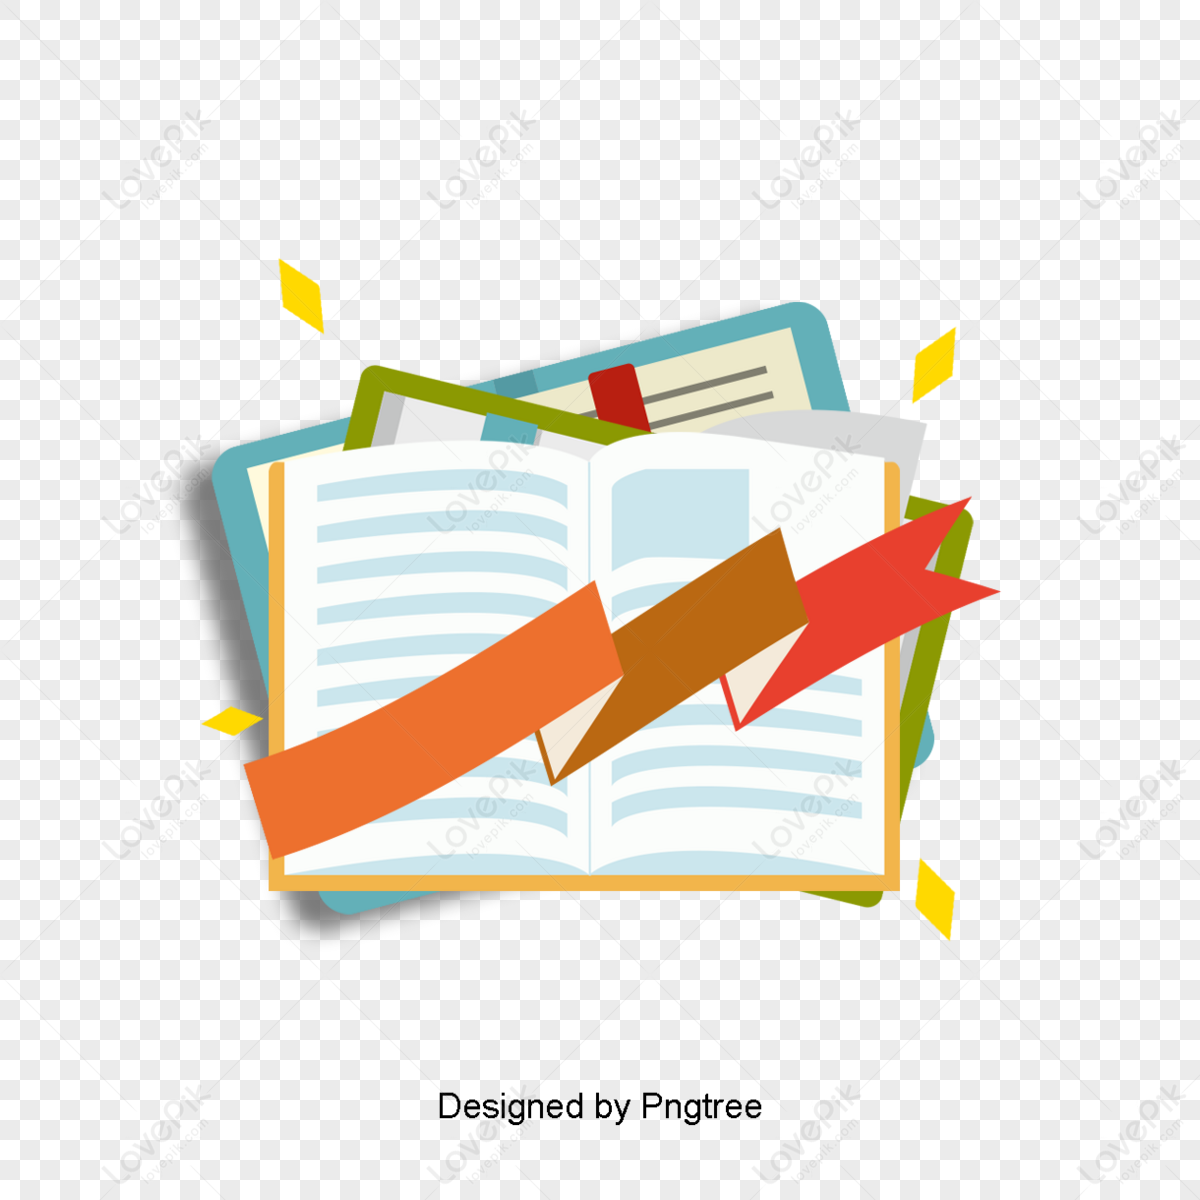 Colorful book design materials,knowledge,learning,color books png image